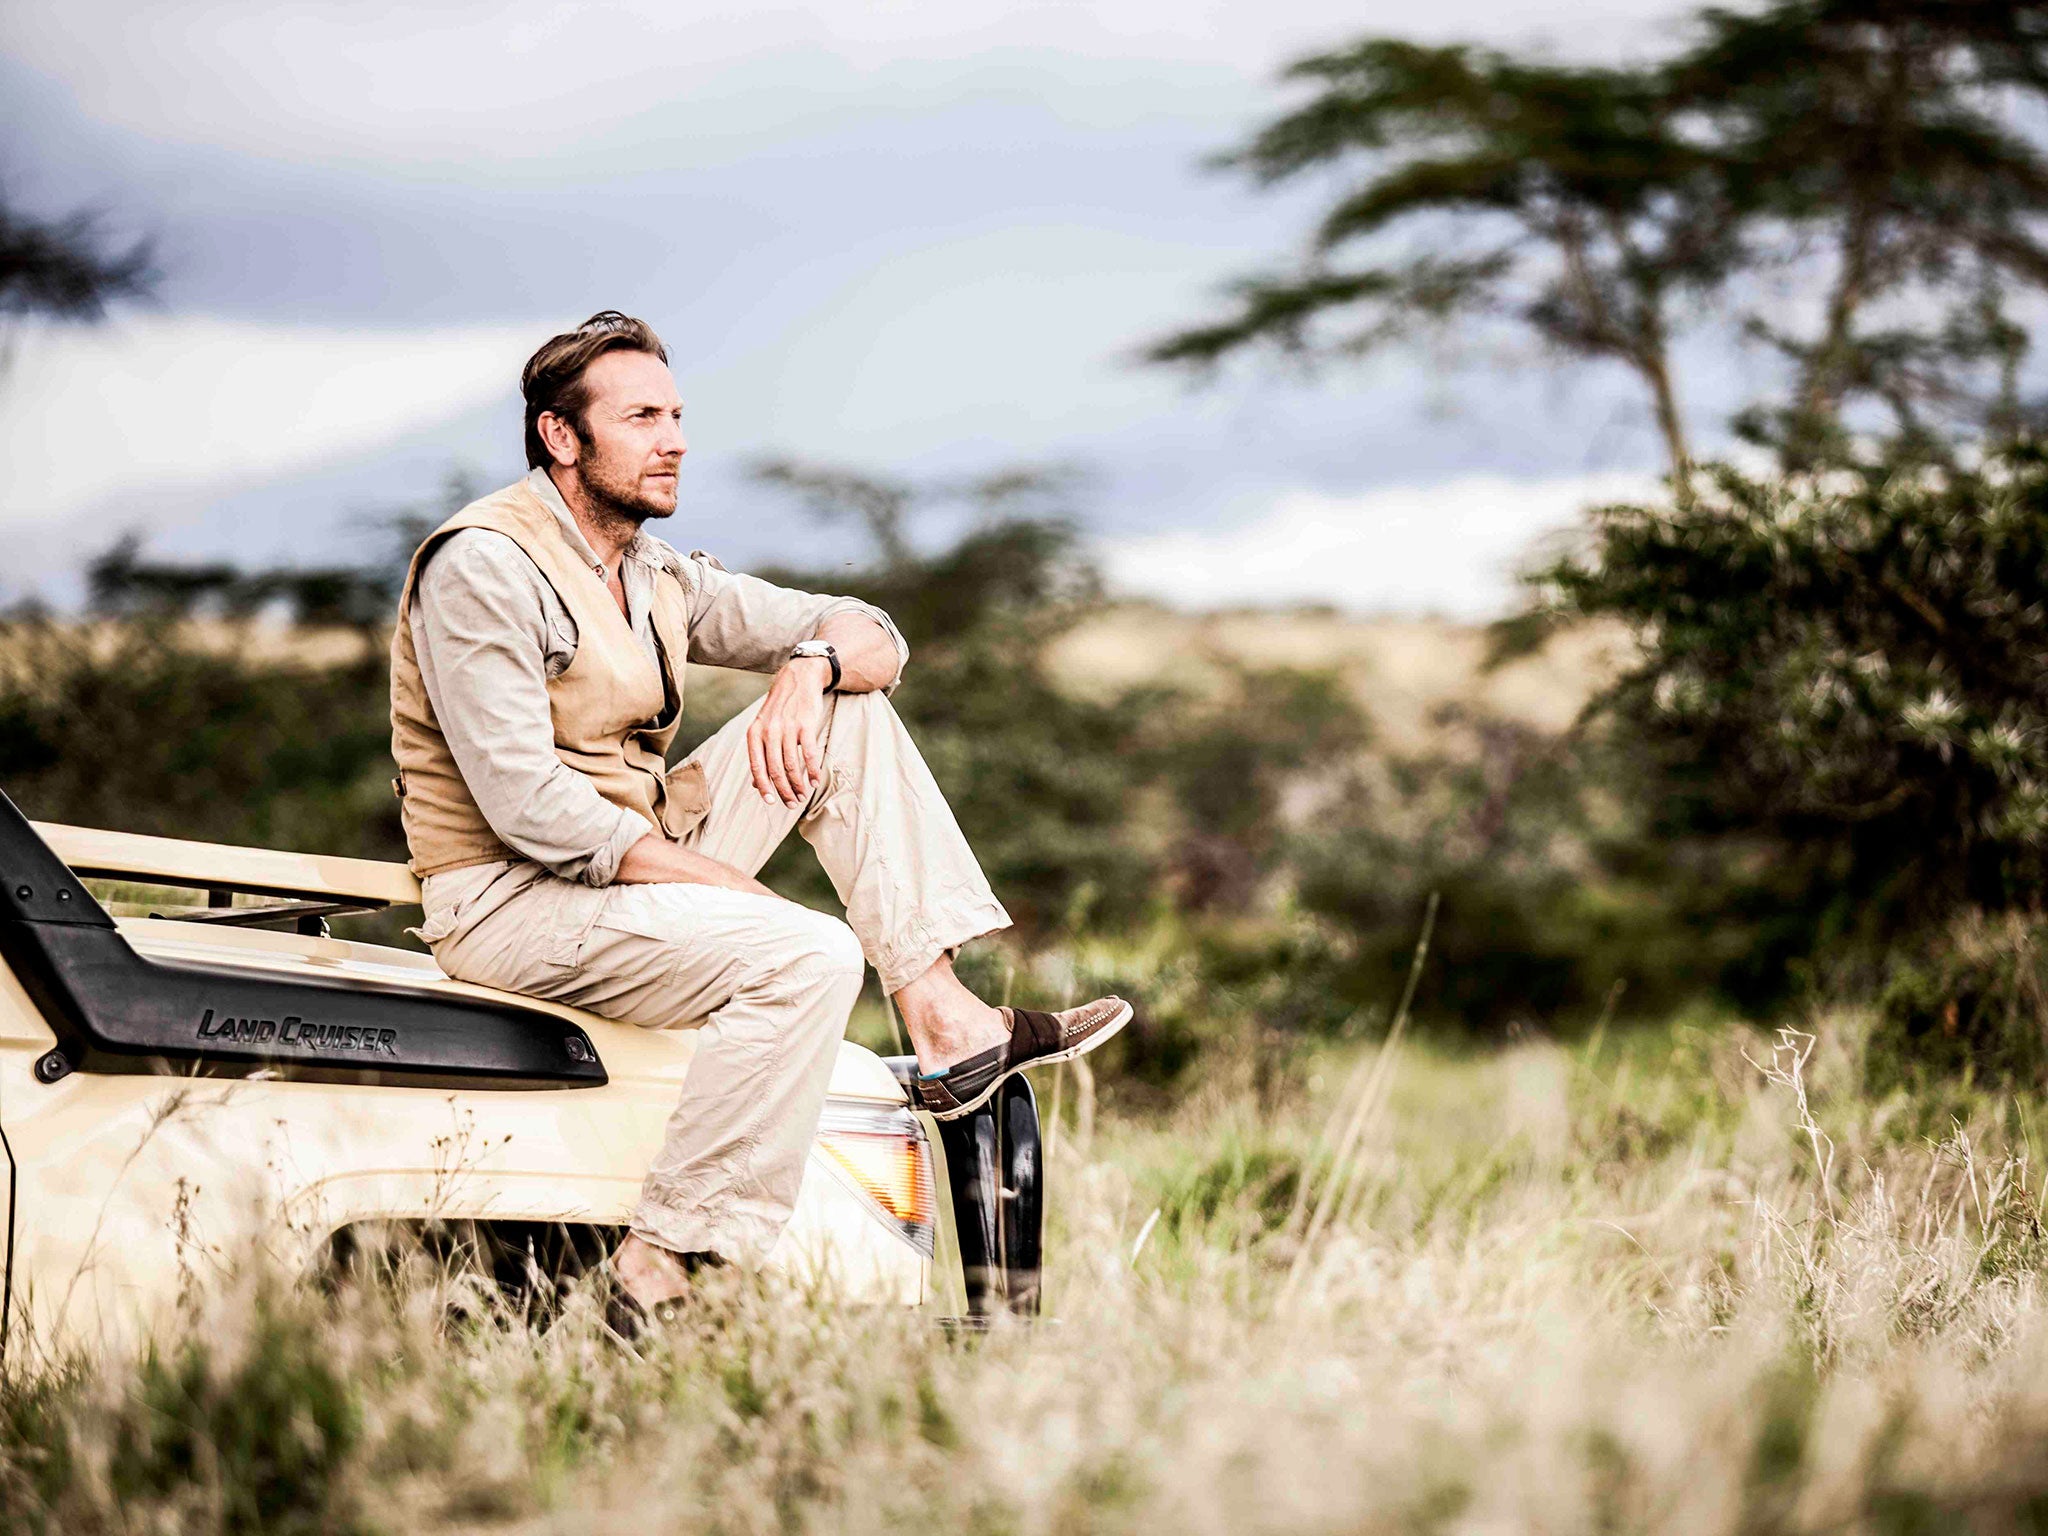 Jochen Zeitz at Segera, his 50,000-acre ranch, which now houses three endangered species